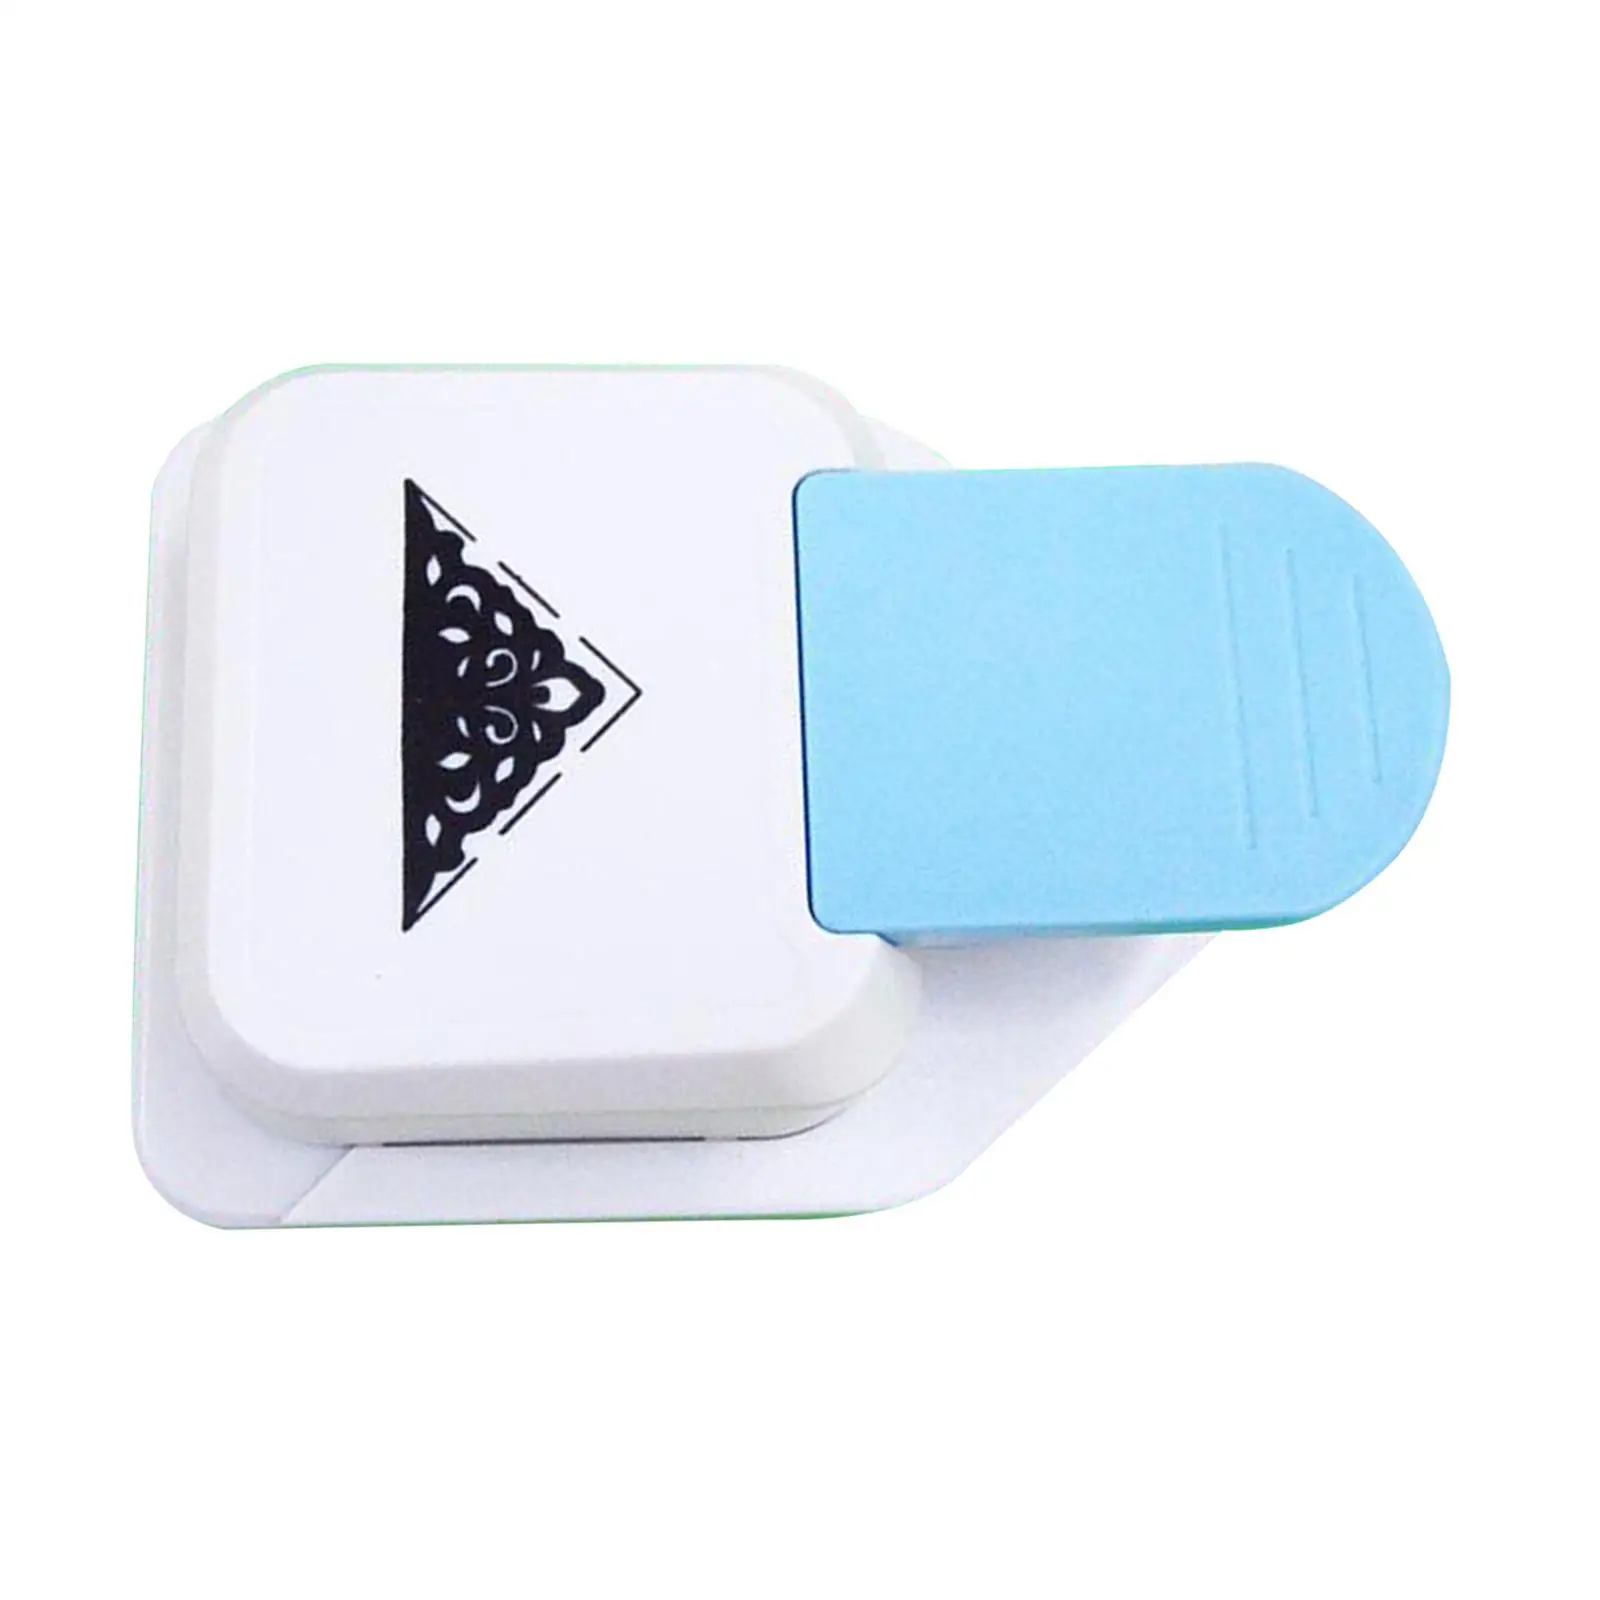 Paper Punch Paper Border Cutter Scrapbooking Bookmark Punchers Craft Tool